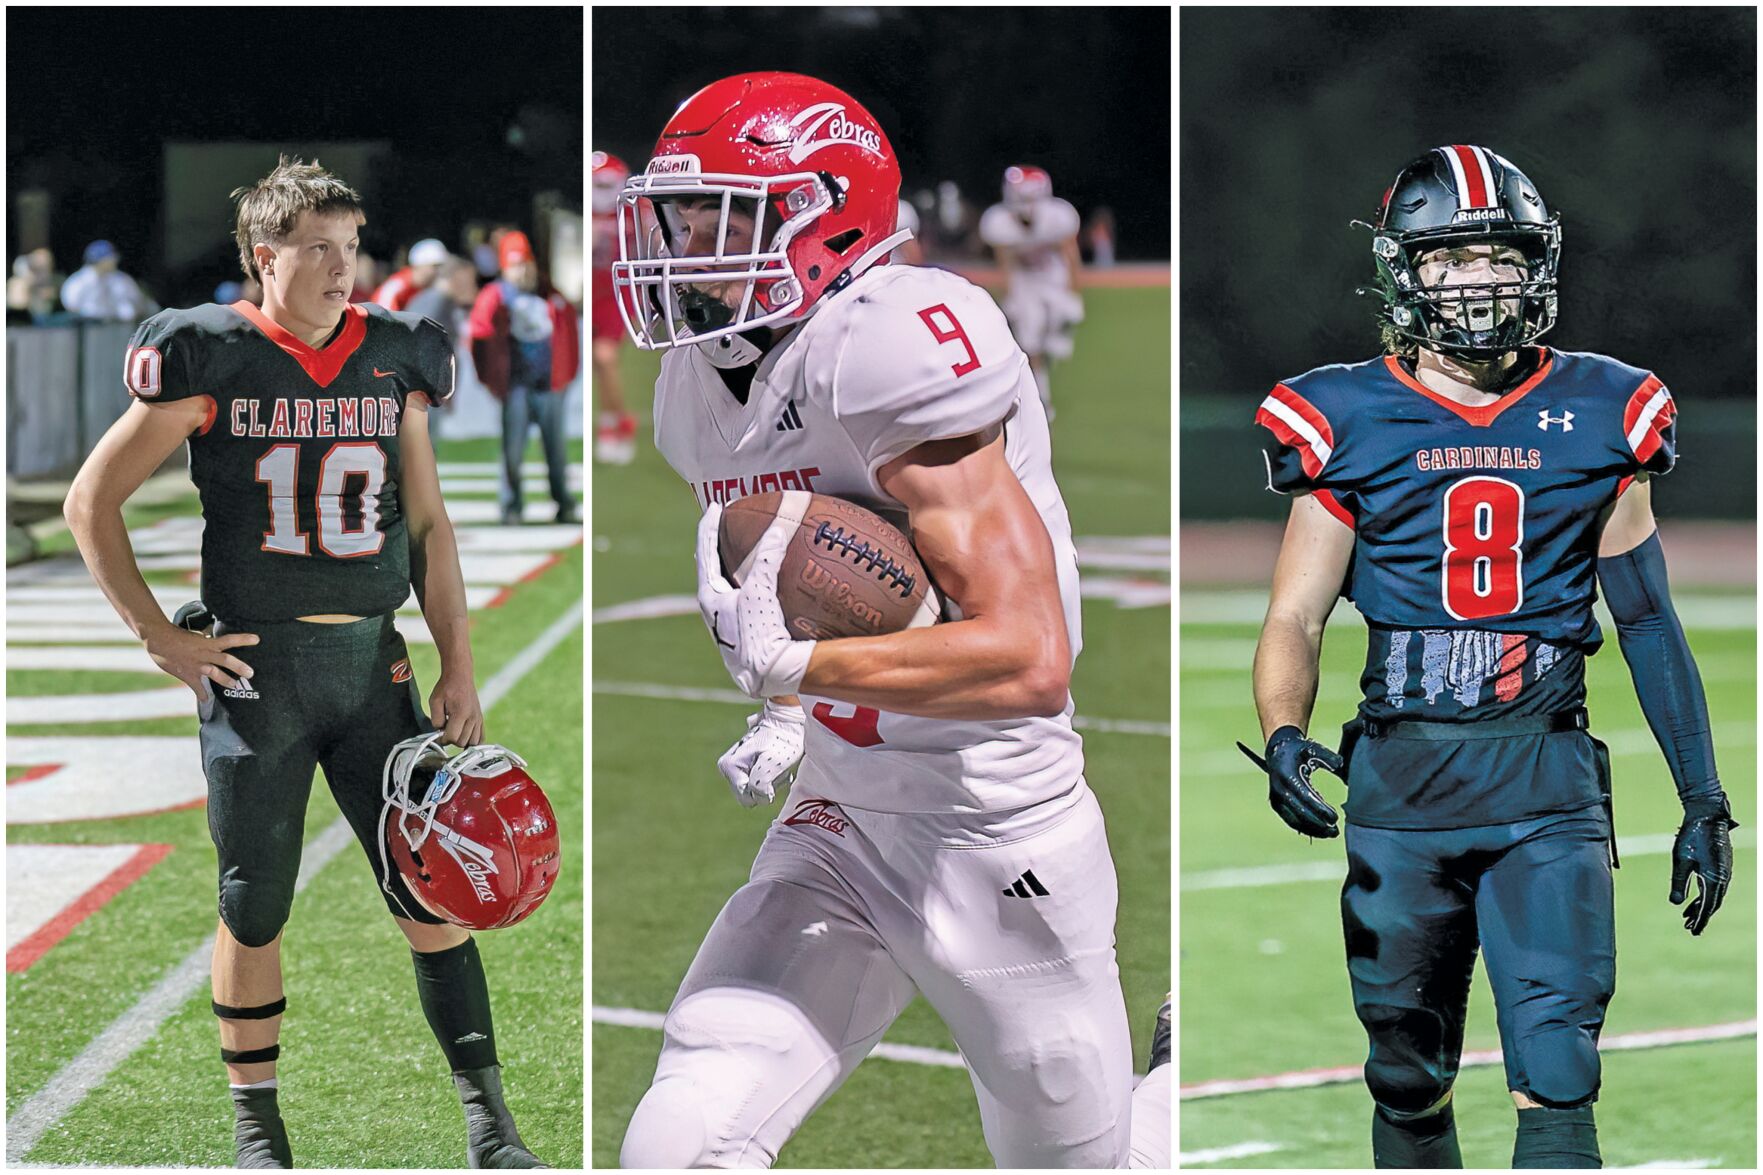 Three Rogers County Football Players Named in OCA All-State Selections